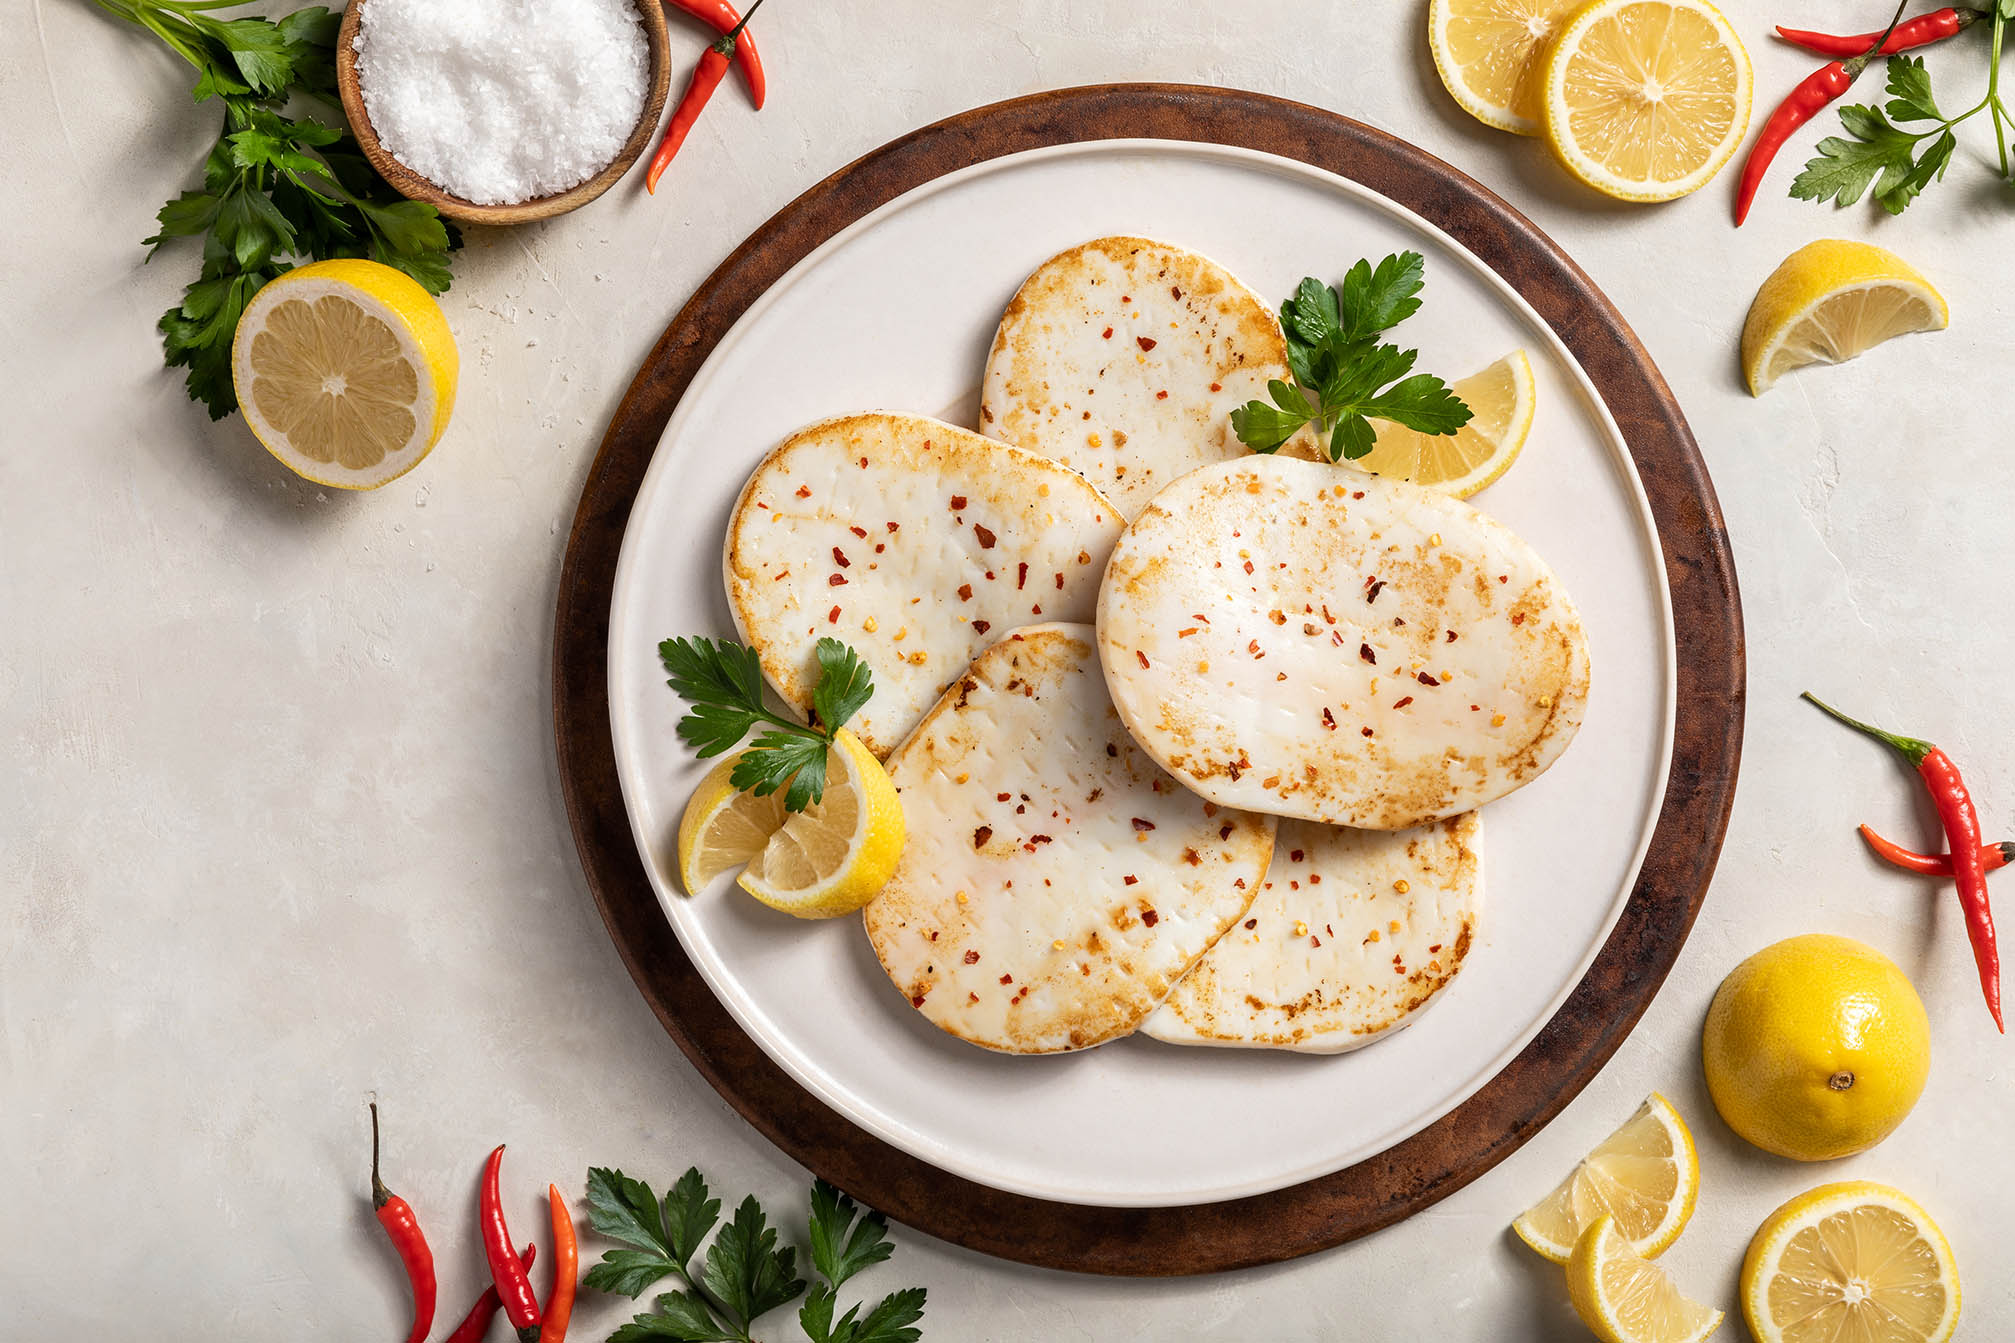 A round plate of calamari steaks, gently cooked, garnished with lemons and hot peppers